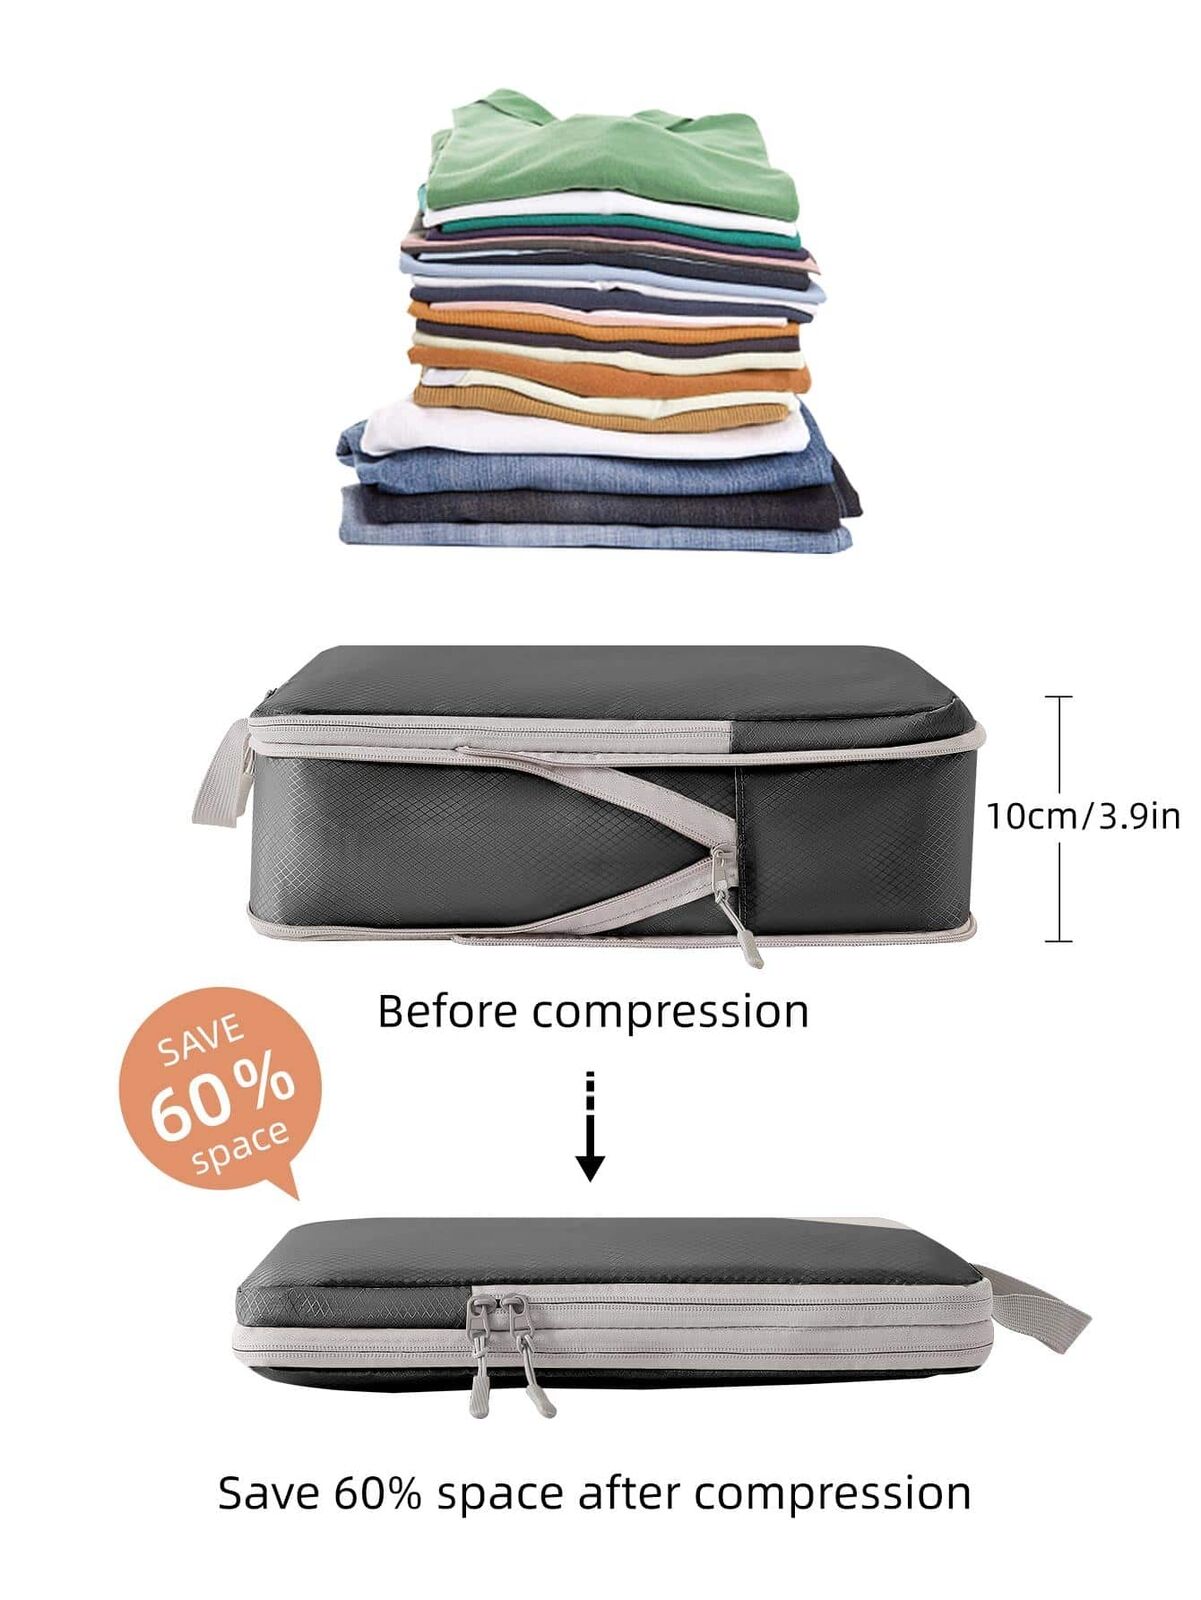 4PCS Storage Compression Bags Luggage Travel Packing Cubes Organiser Suitcases